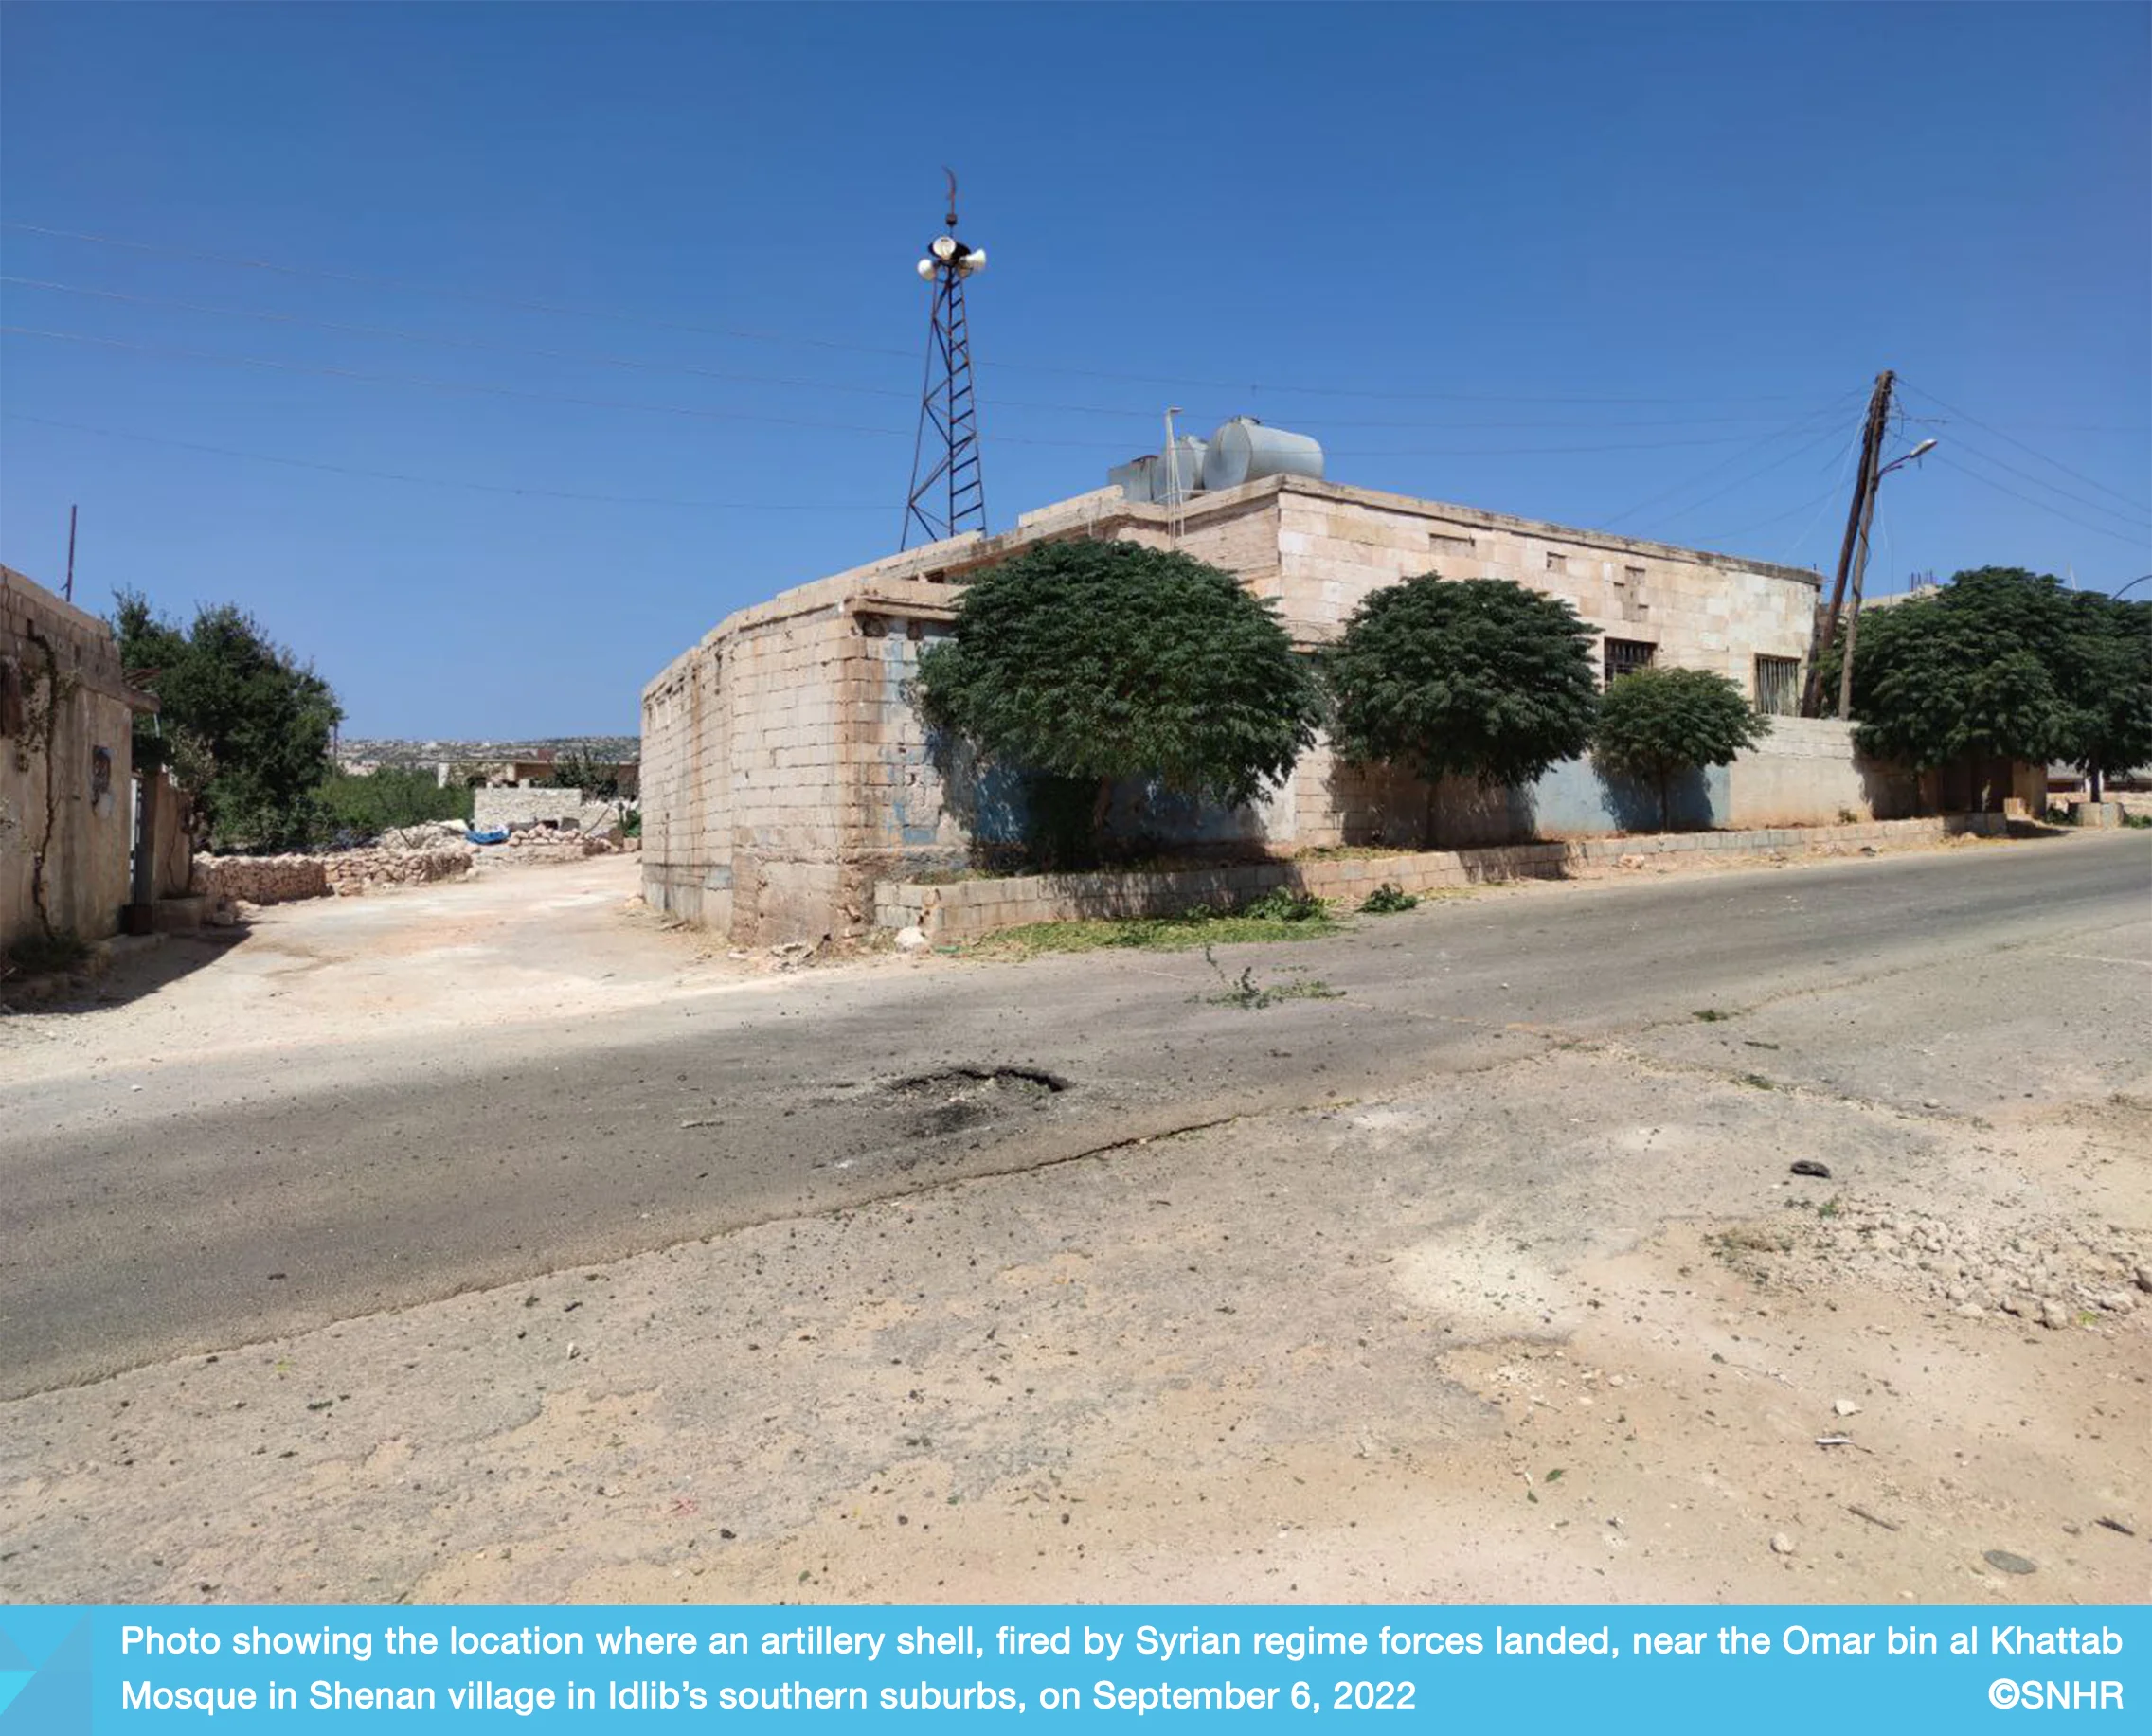 Damage near a mosque due to syrian regime shelling on Idlib suburbs